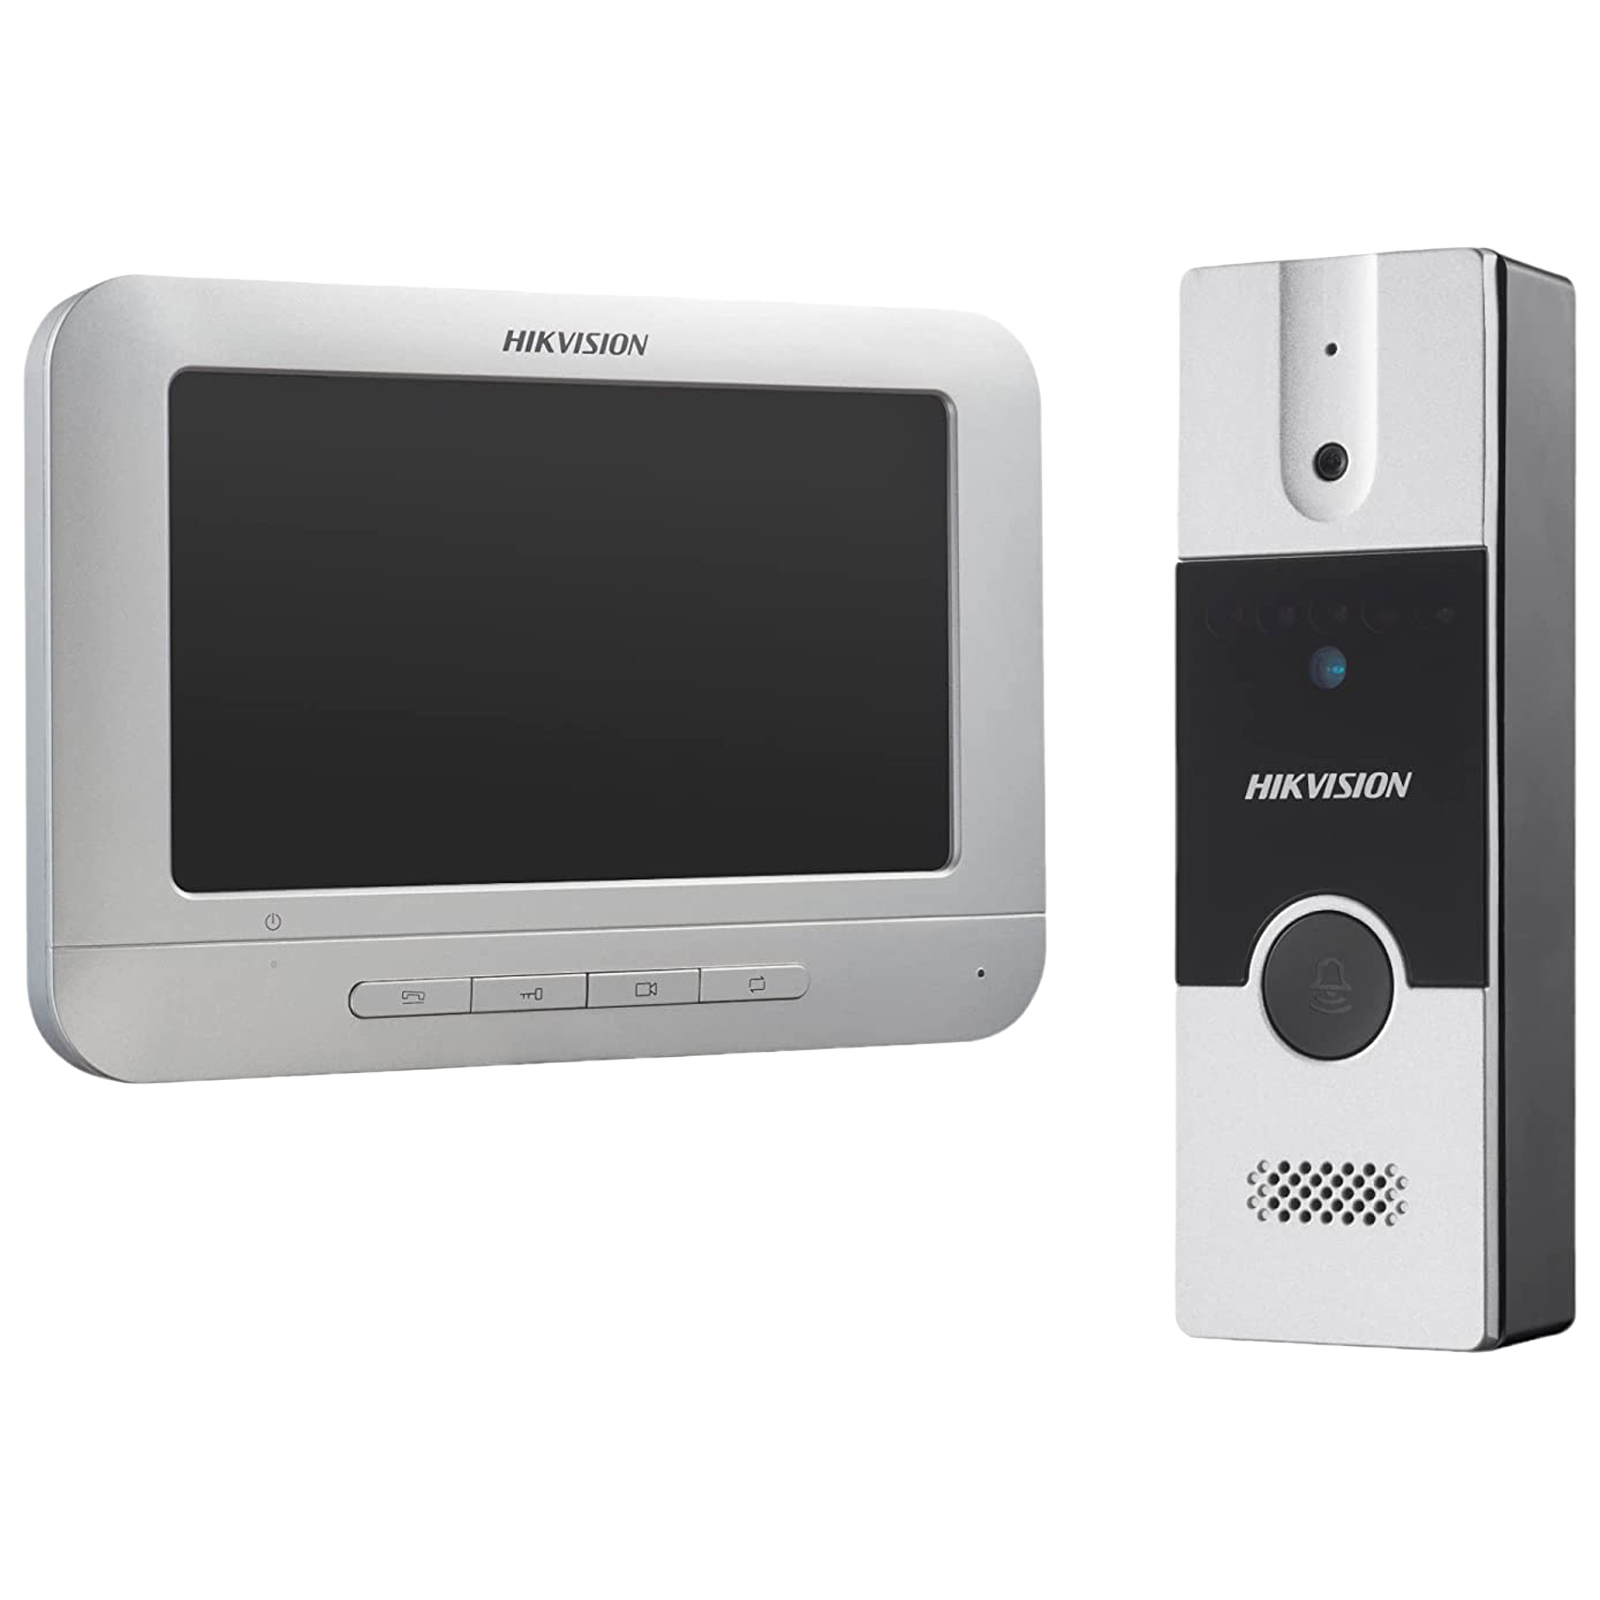 Hikvision 7 Inch Video Door Phone Kit (TFT LCD Display, DS-KIS204T, White)